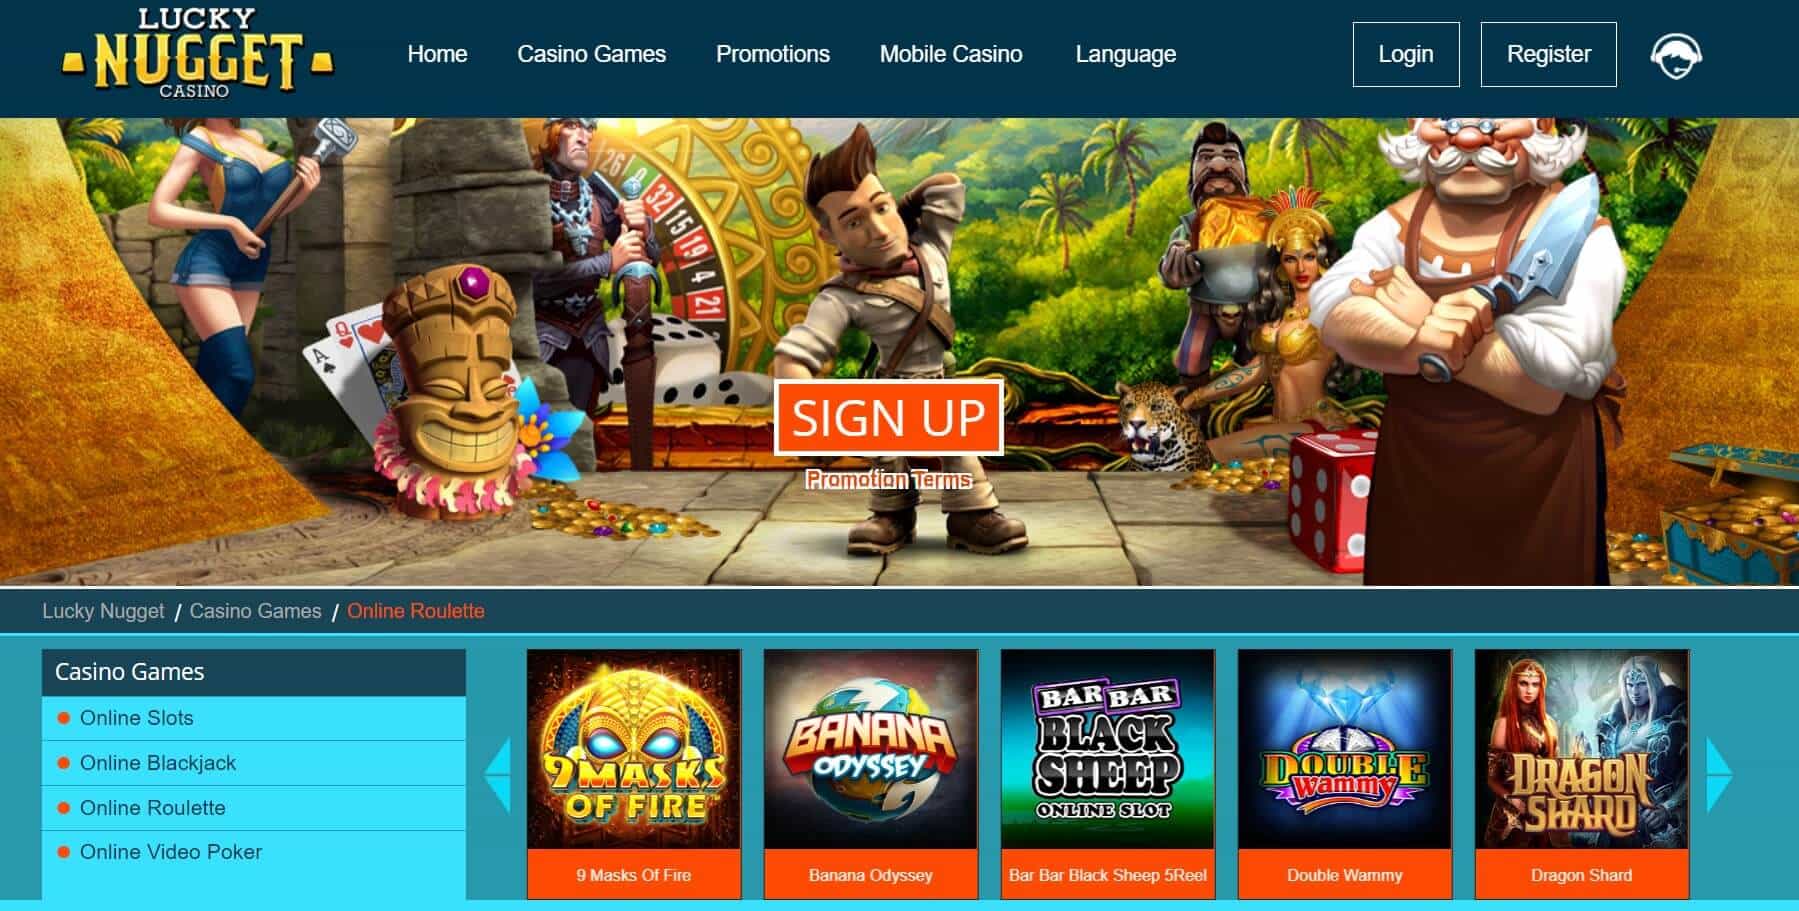 How Lucky Nugget Casino Online Ensures Fair Gaming and Security